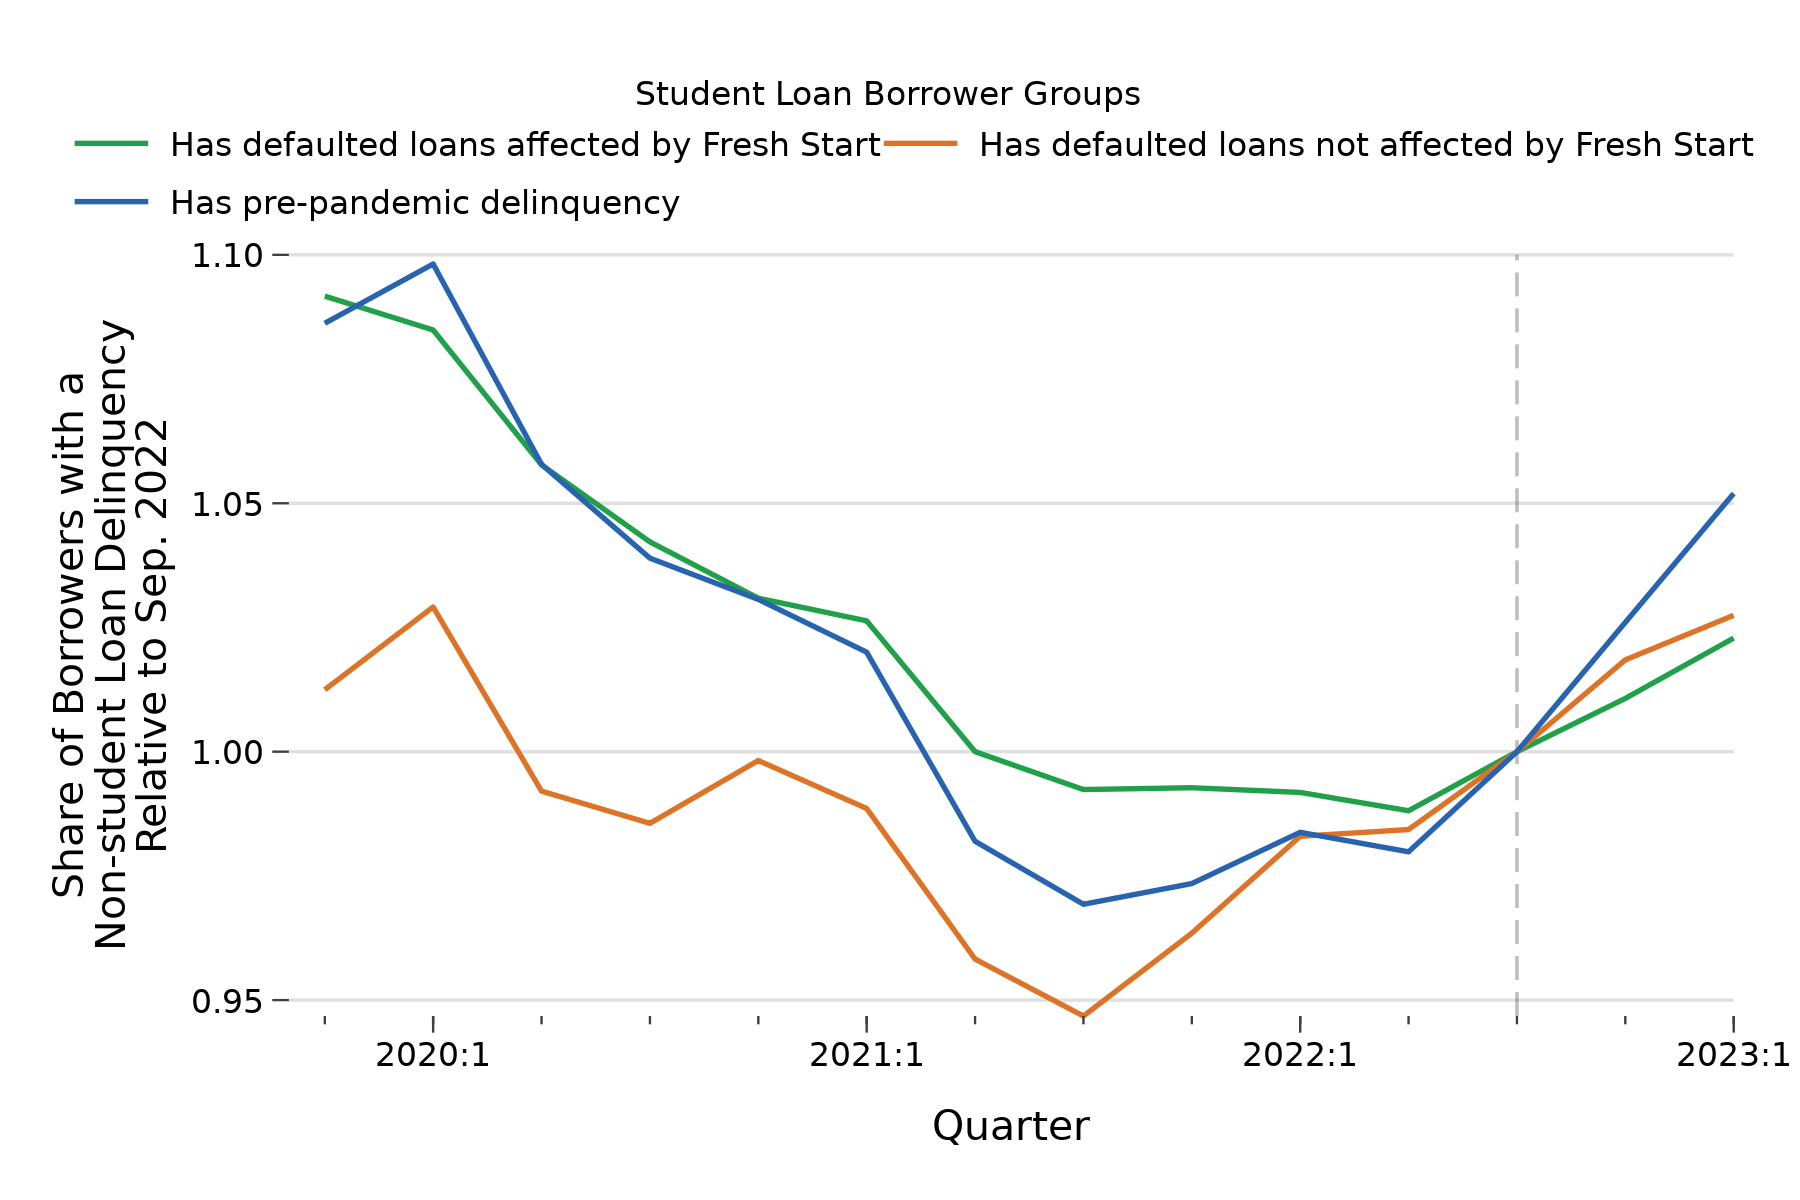 Line graph showing delinquencies on non-student loan credit accounts for borrowers affected by Fresh Start, borrowers with defaulted loans not affected by Fresh Start, and borrowers with pre-pandemic student loan delinquencies from December 2019 through March 2023 relative to September 2022. Since mid-2021, delinquencies have increased for all groups, but especially for those with pre-pandemic delinquencies.